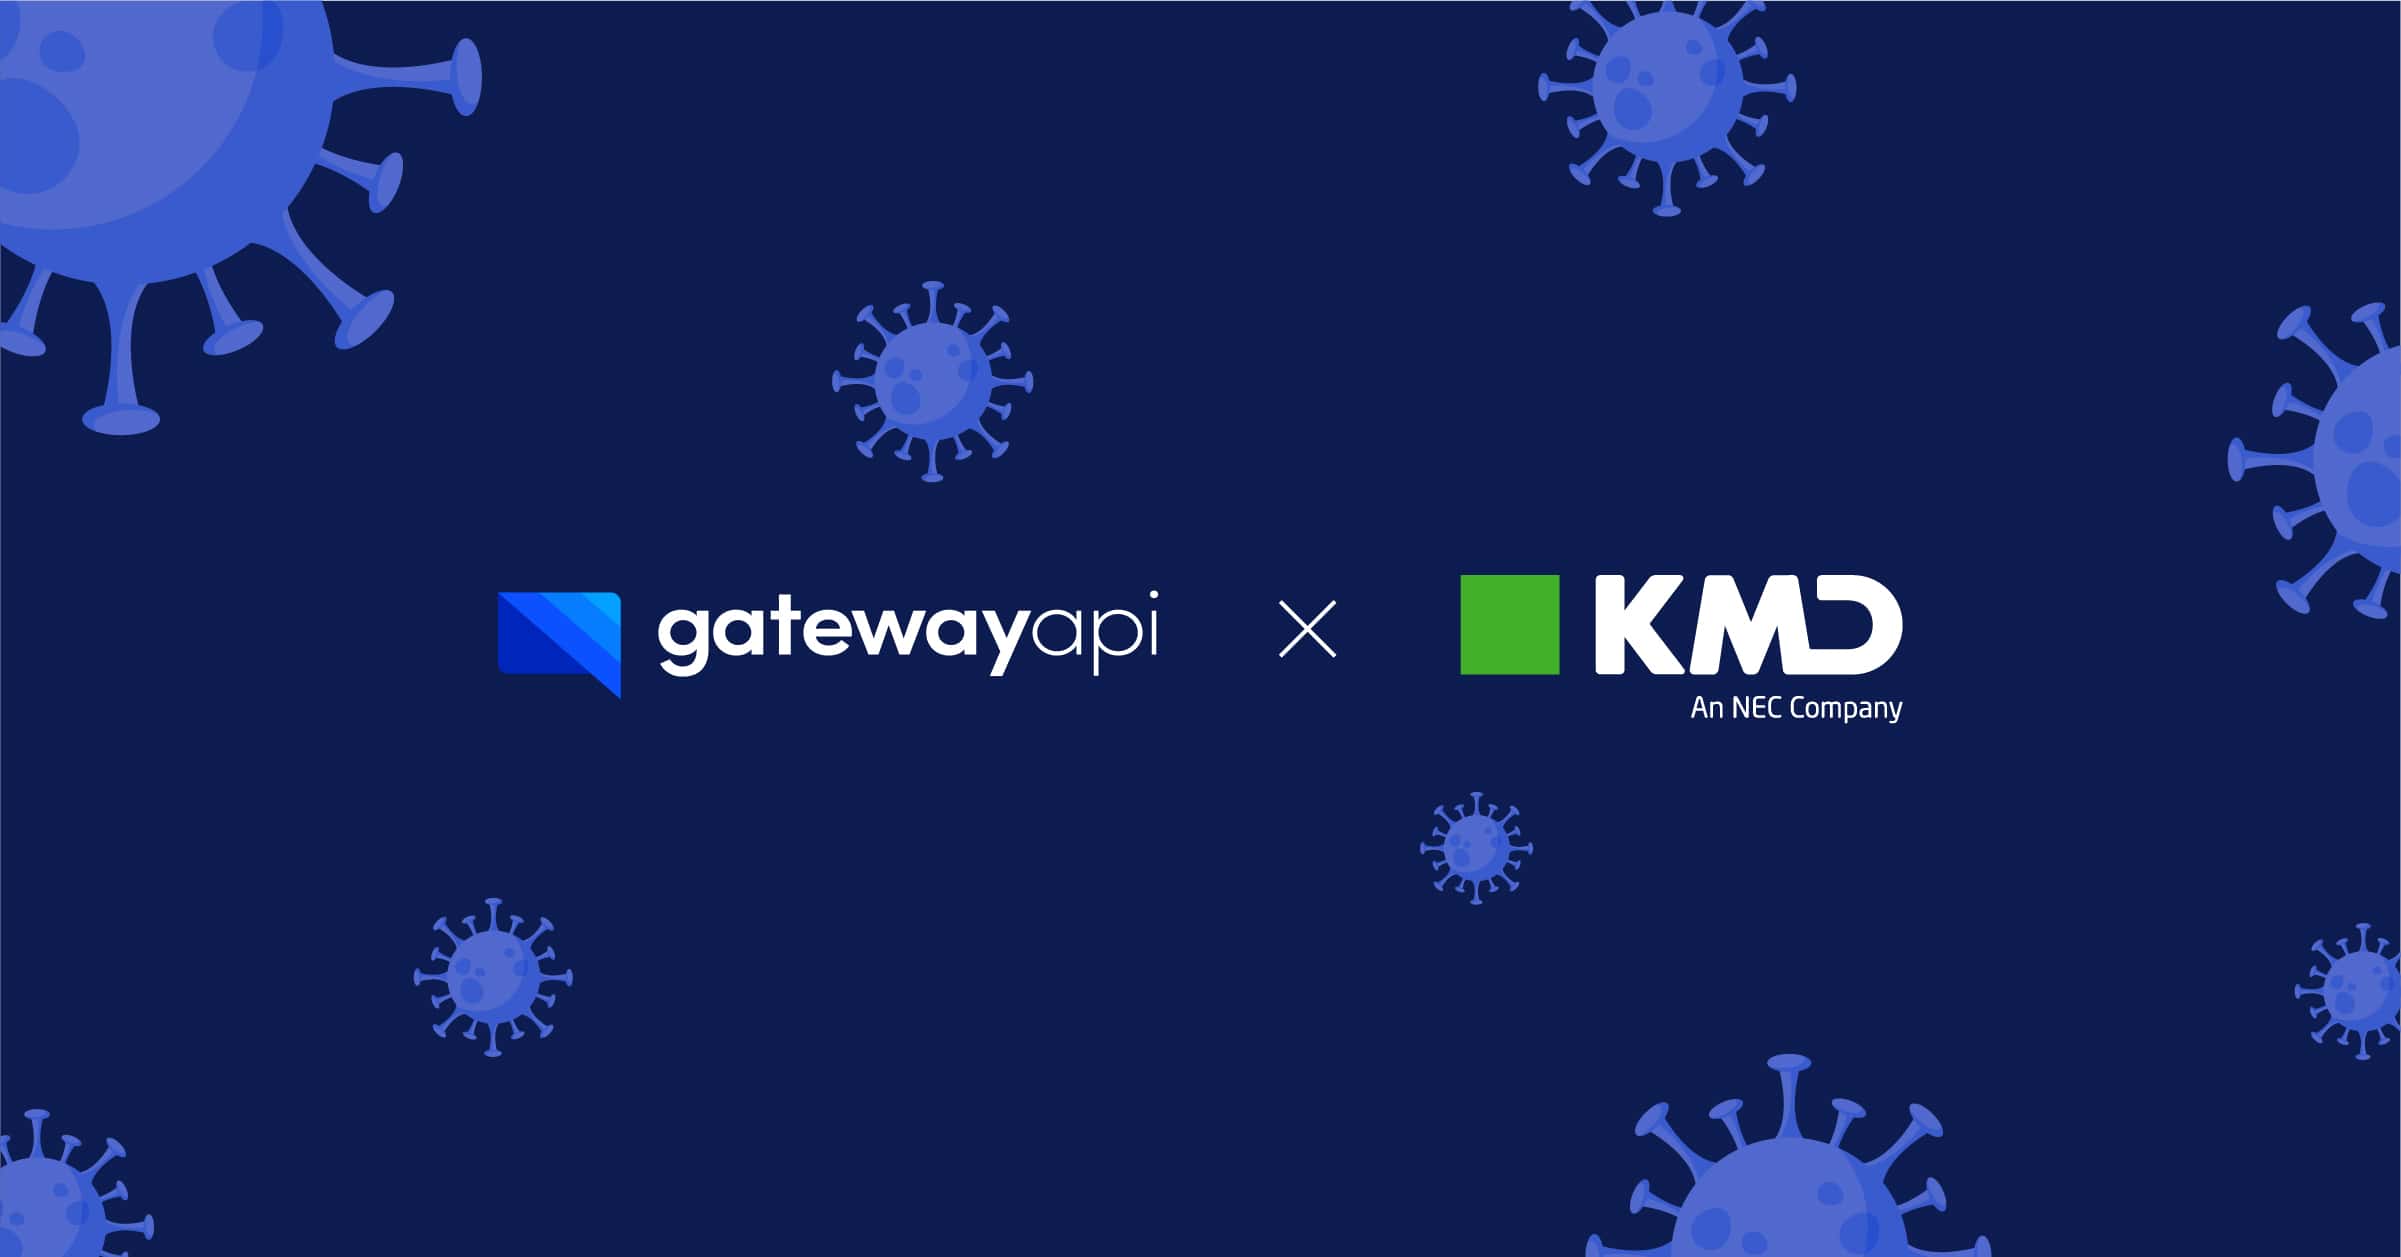 GatewayAPI and KMD: A collaboration on COVID-19 test results via SMS